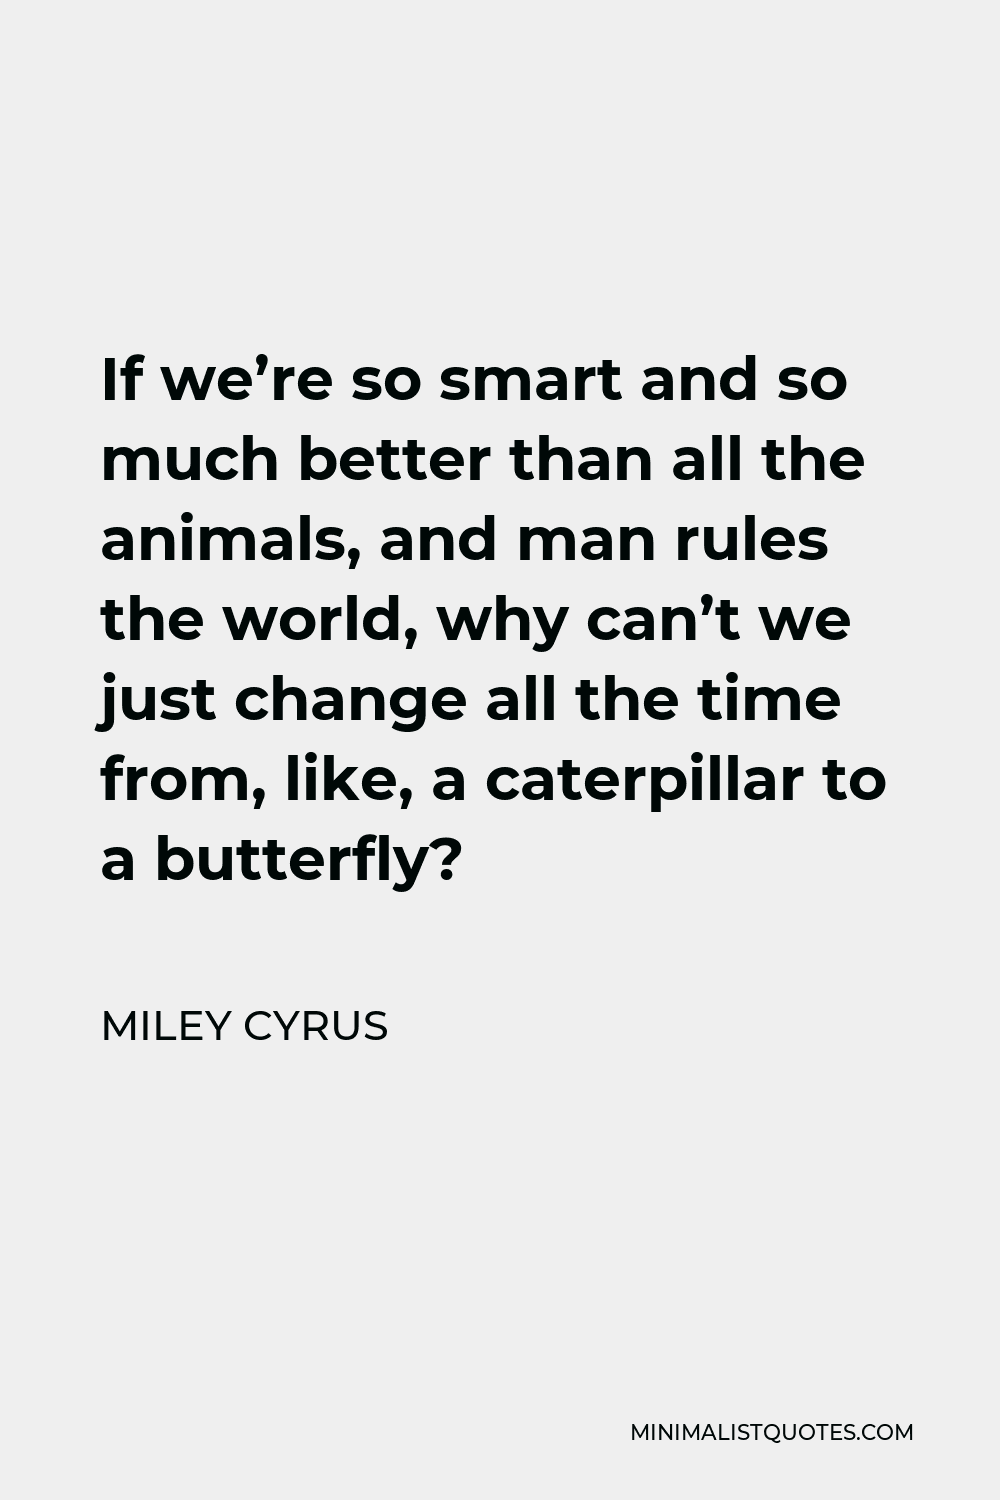 Miley Cyrus Quote: If we're so smart and so much better than all the animals,  and man rules the world, why can't we just change all the time from, like,  a caterpillar